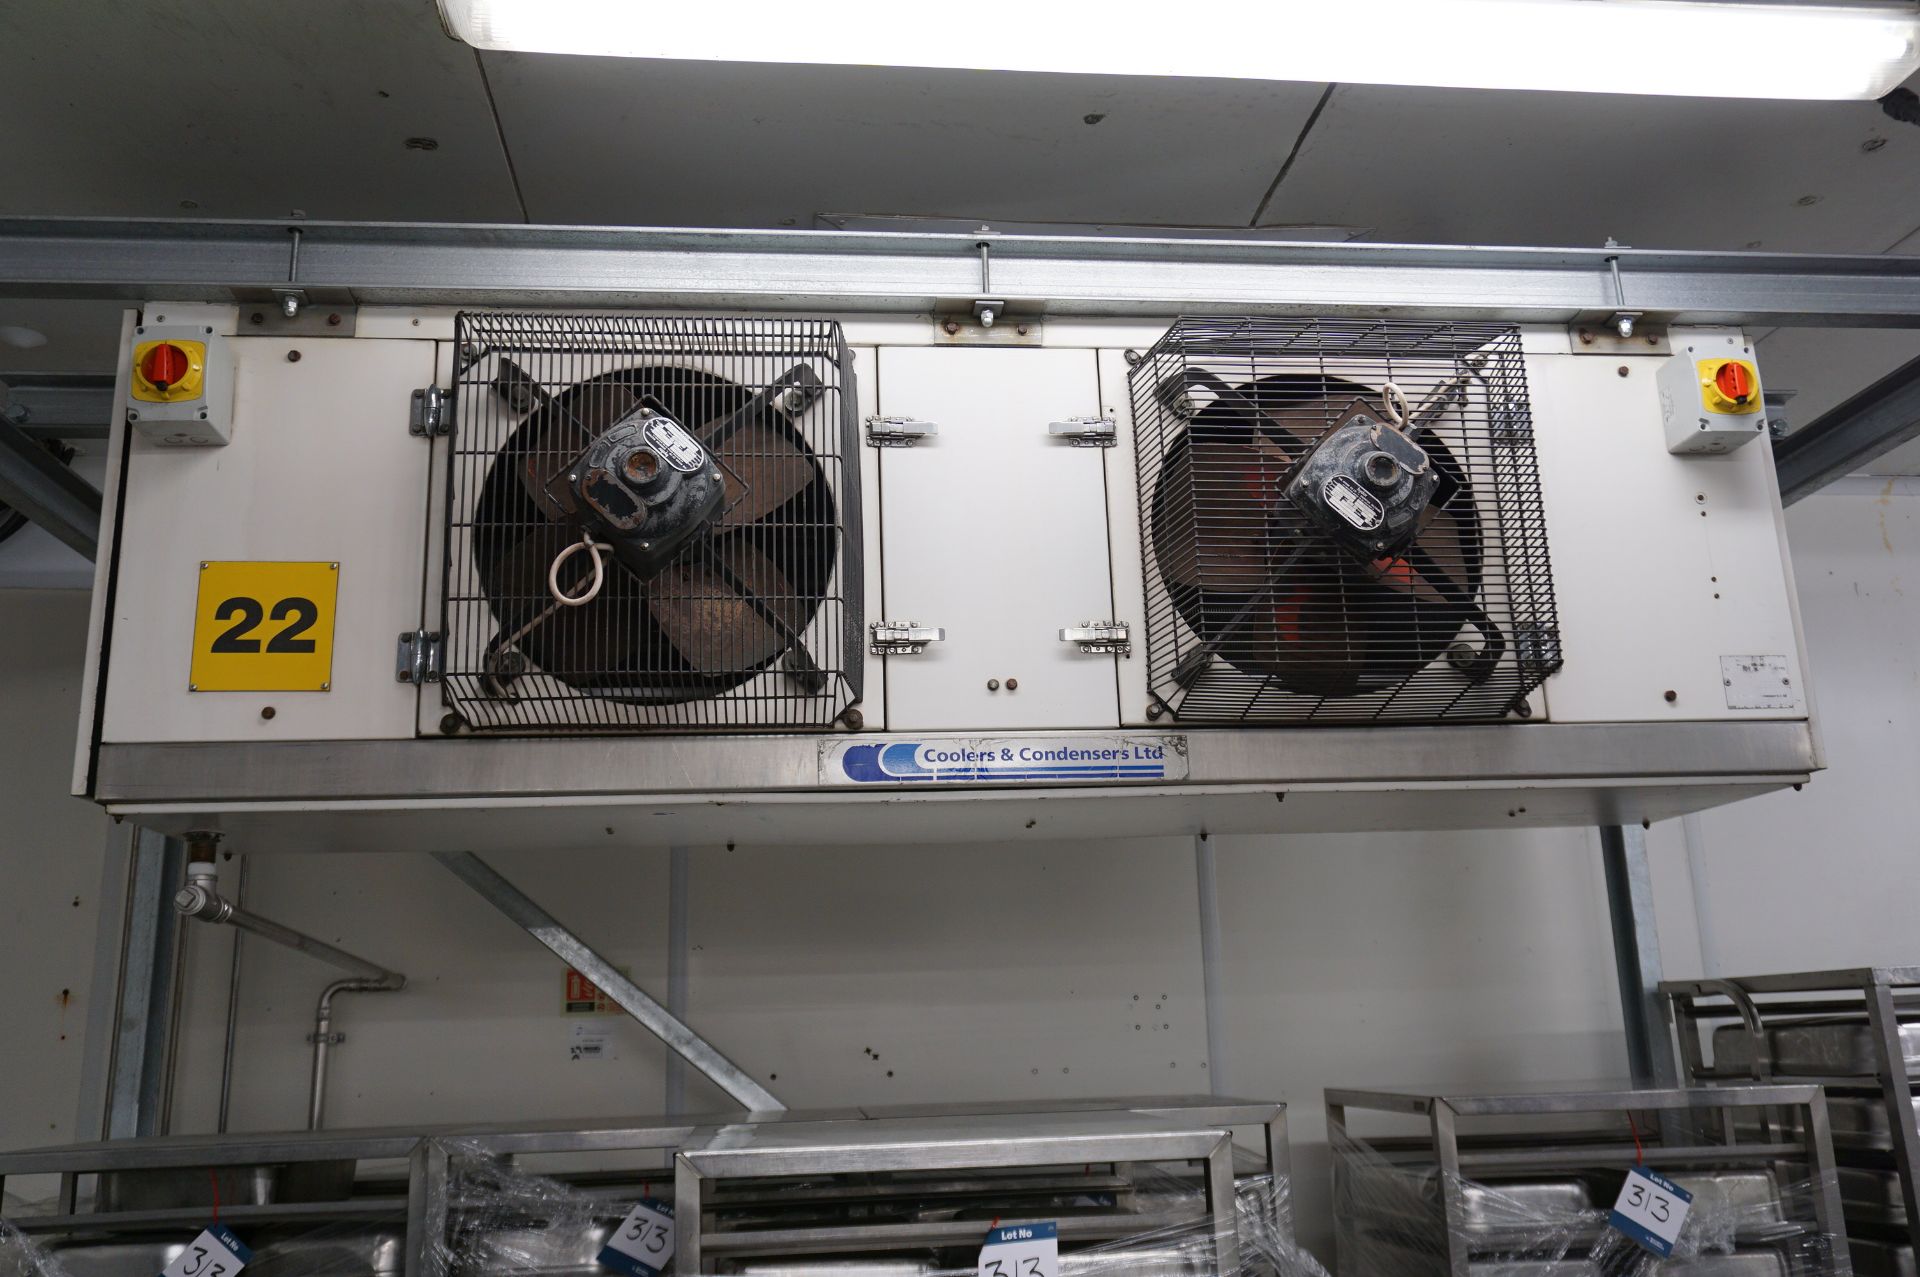 Coolers & Condensers, Model: CA10, twin fan chiller unit with support frame (Lift out charge to